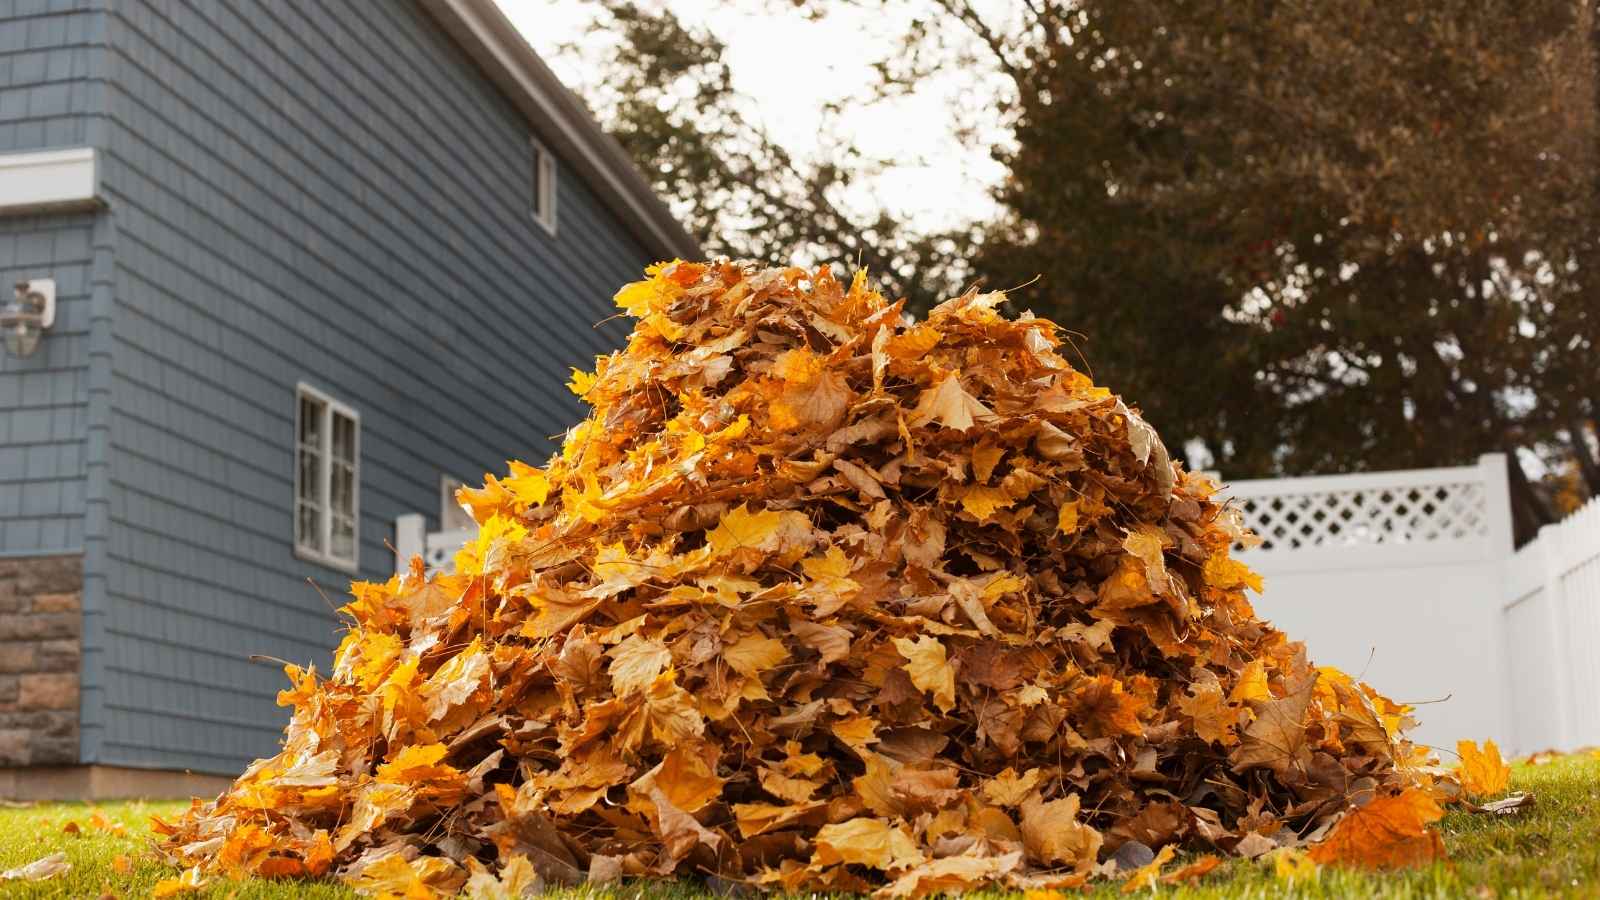 A big pile of golden autumn leaves.